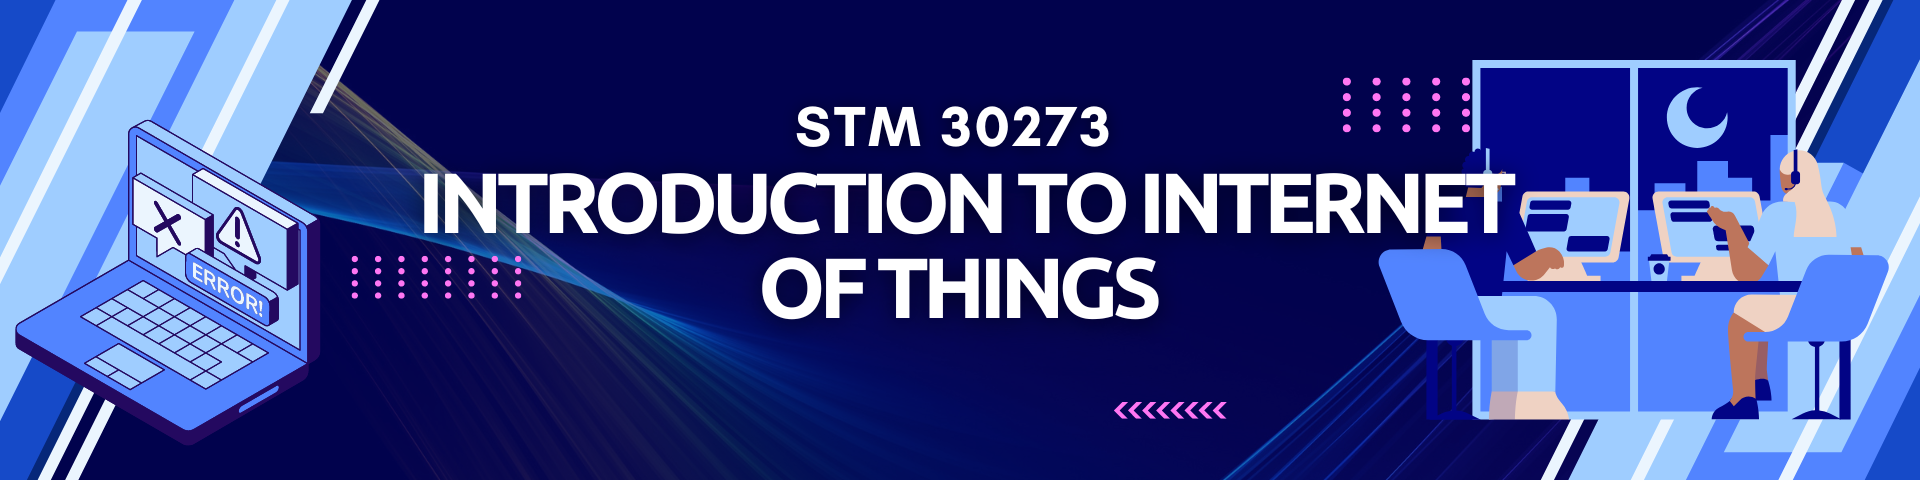 STM 30273 INTRODUCTION TO INTERNET OF THINGS